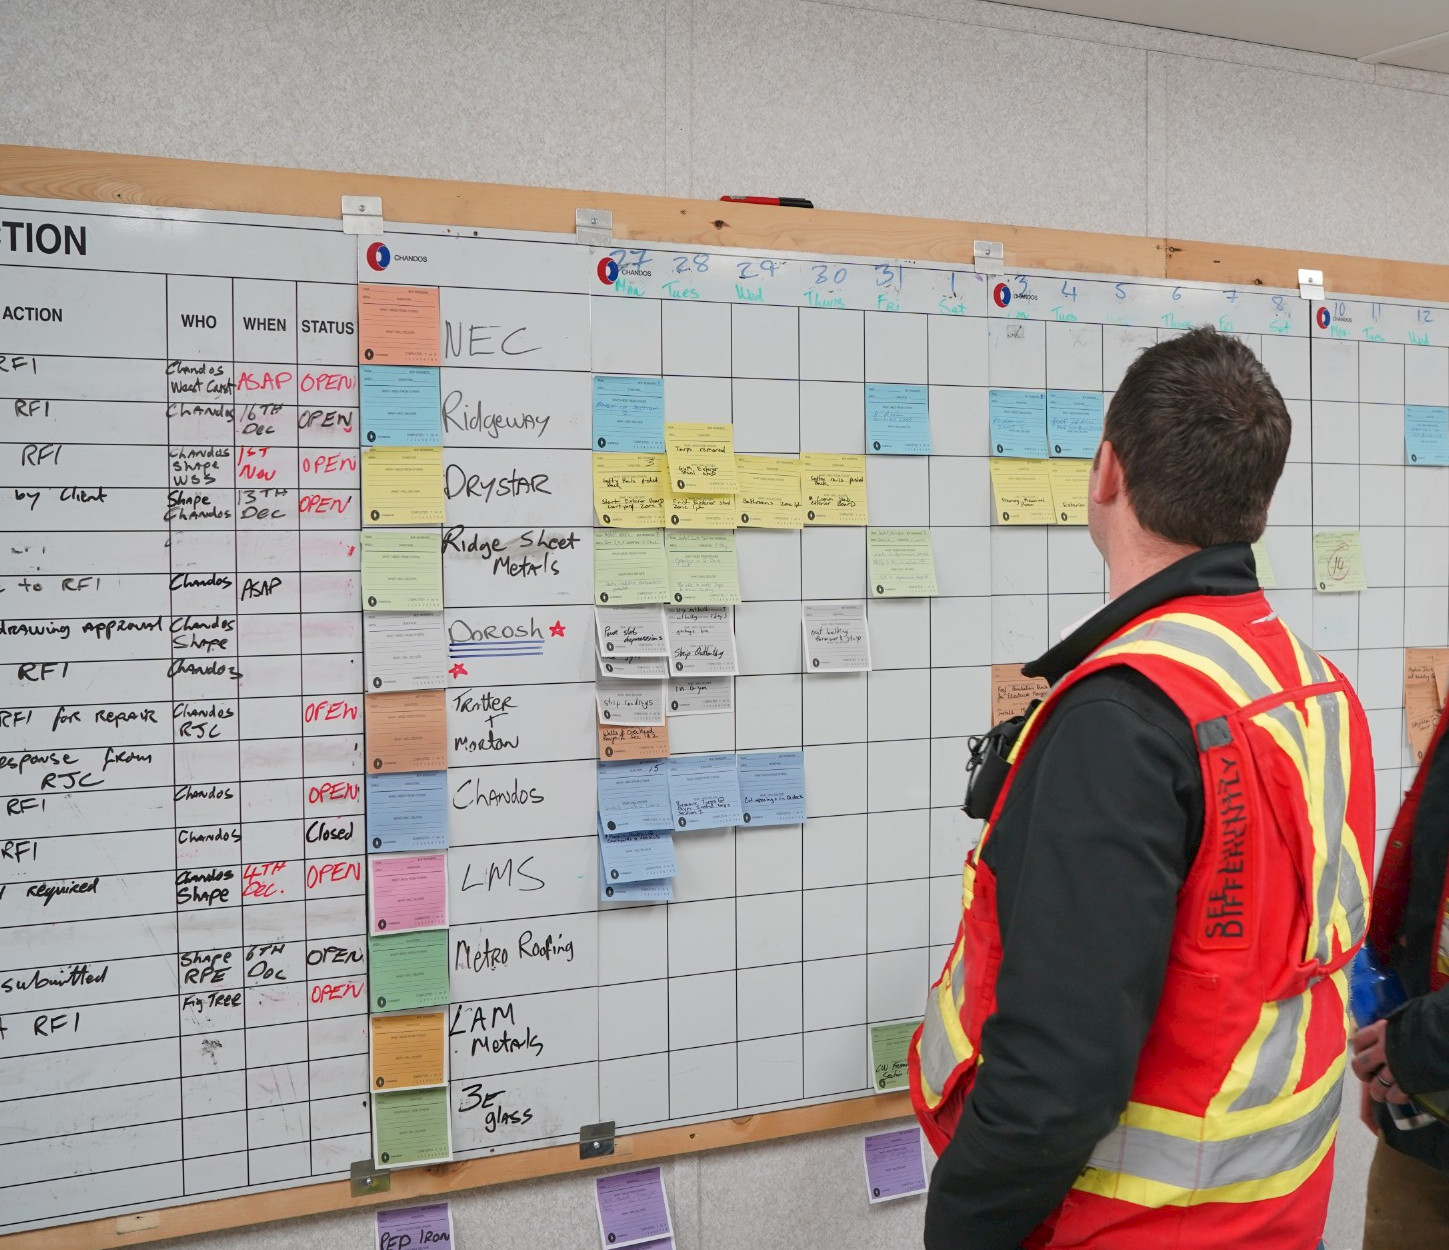 A Chandos construction worker observing a whiteboard with multiple multicoloured sticky notes.